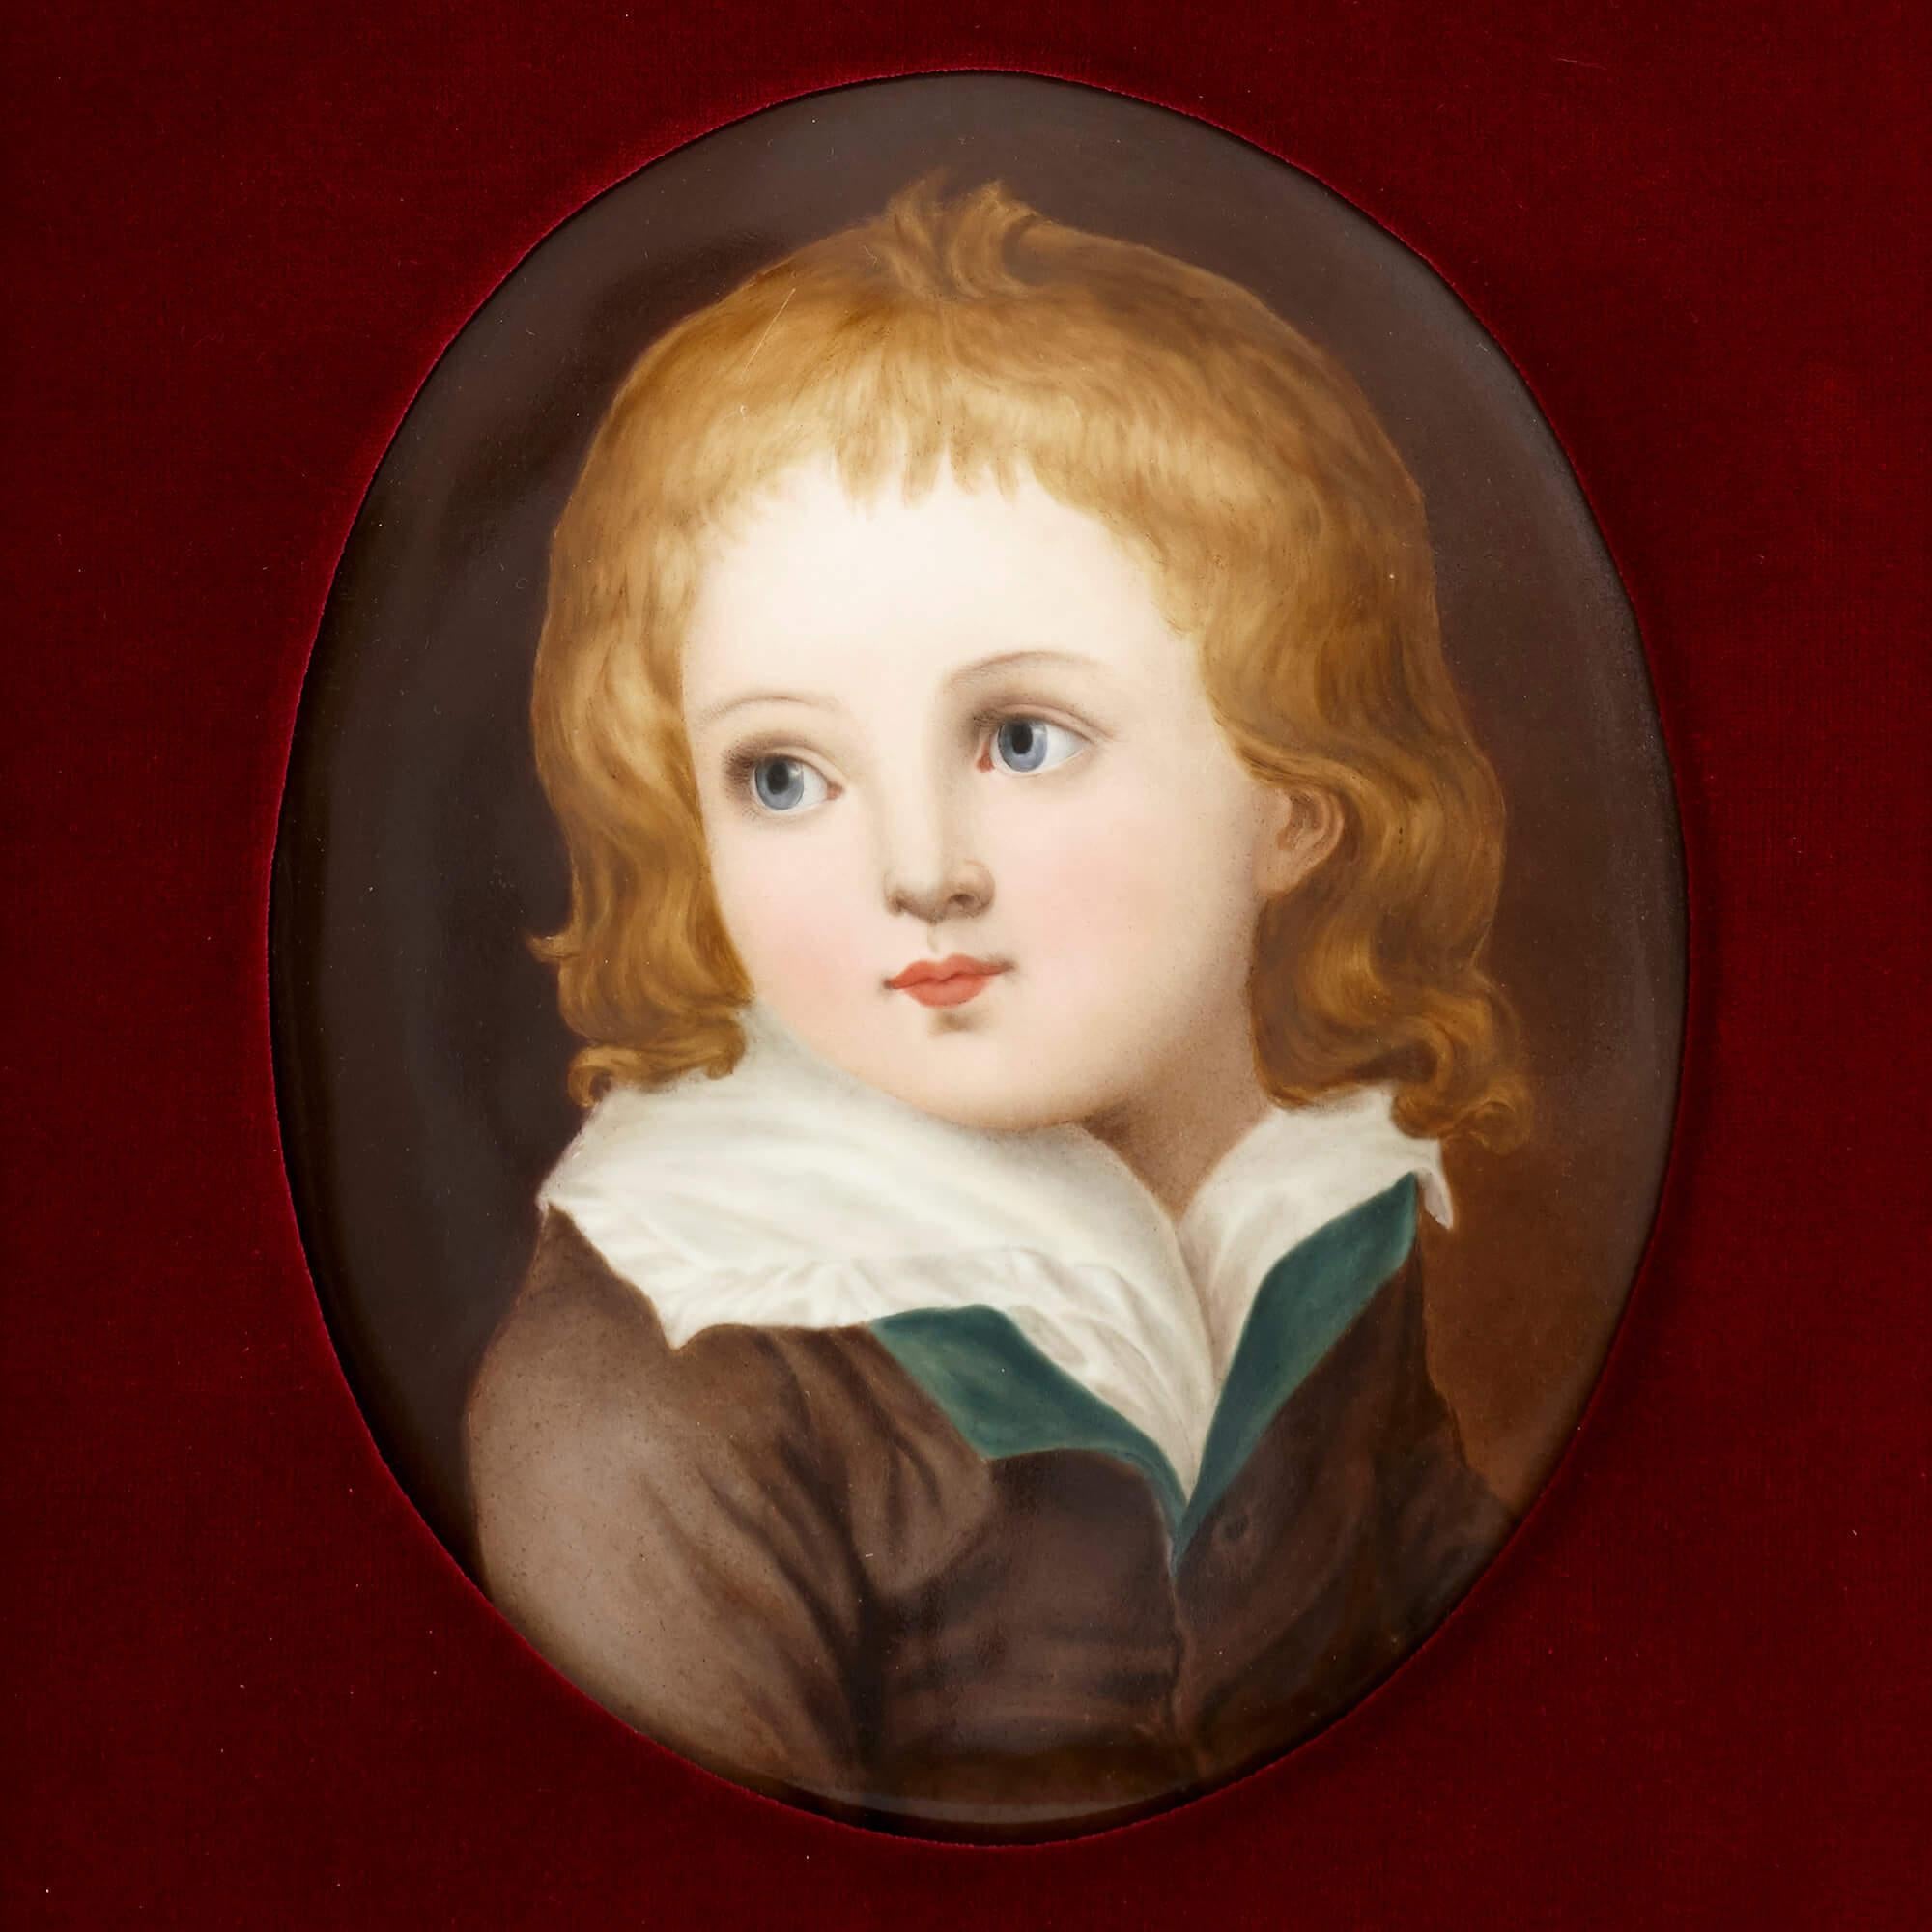 This pair of portraits are of oval form and depict the half-length figures of a young boy and girl. The boy has fair, shoulder-length hair and wears a white shirt and green-lined brown overcoat. He turns to his right and gazes off into the distance.